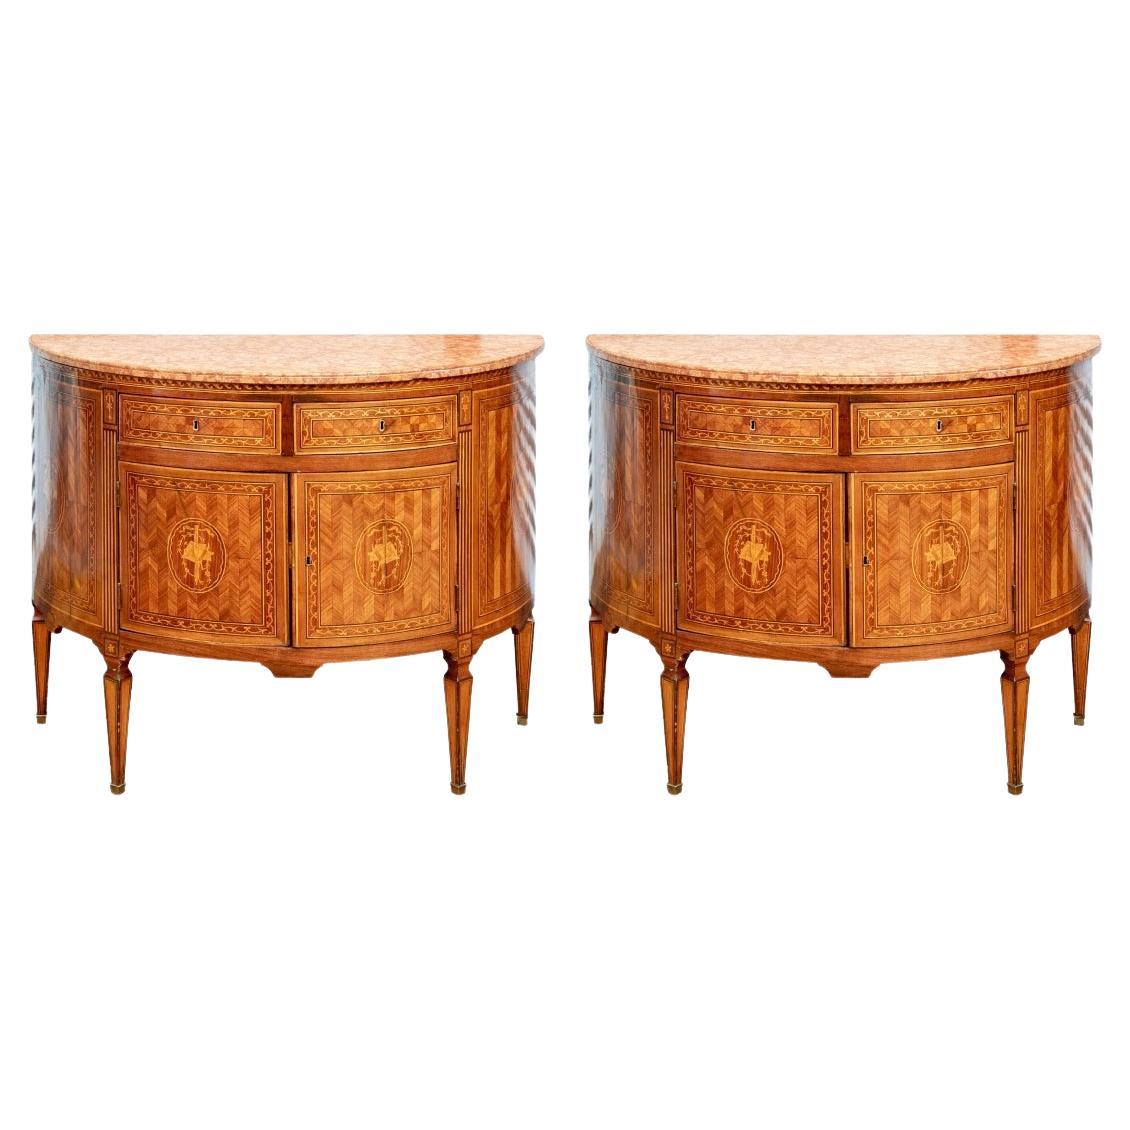 Pair of Italian Neoclassical Style Parquetry And Marquetry Bow Front Chests For Sale